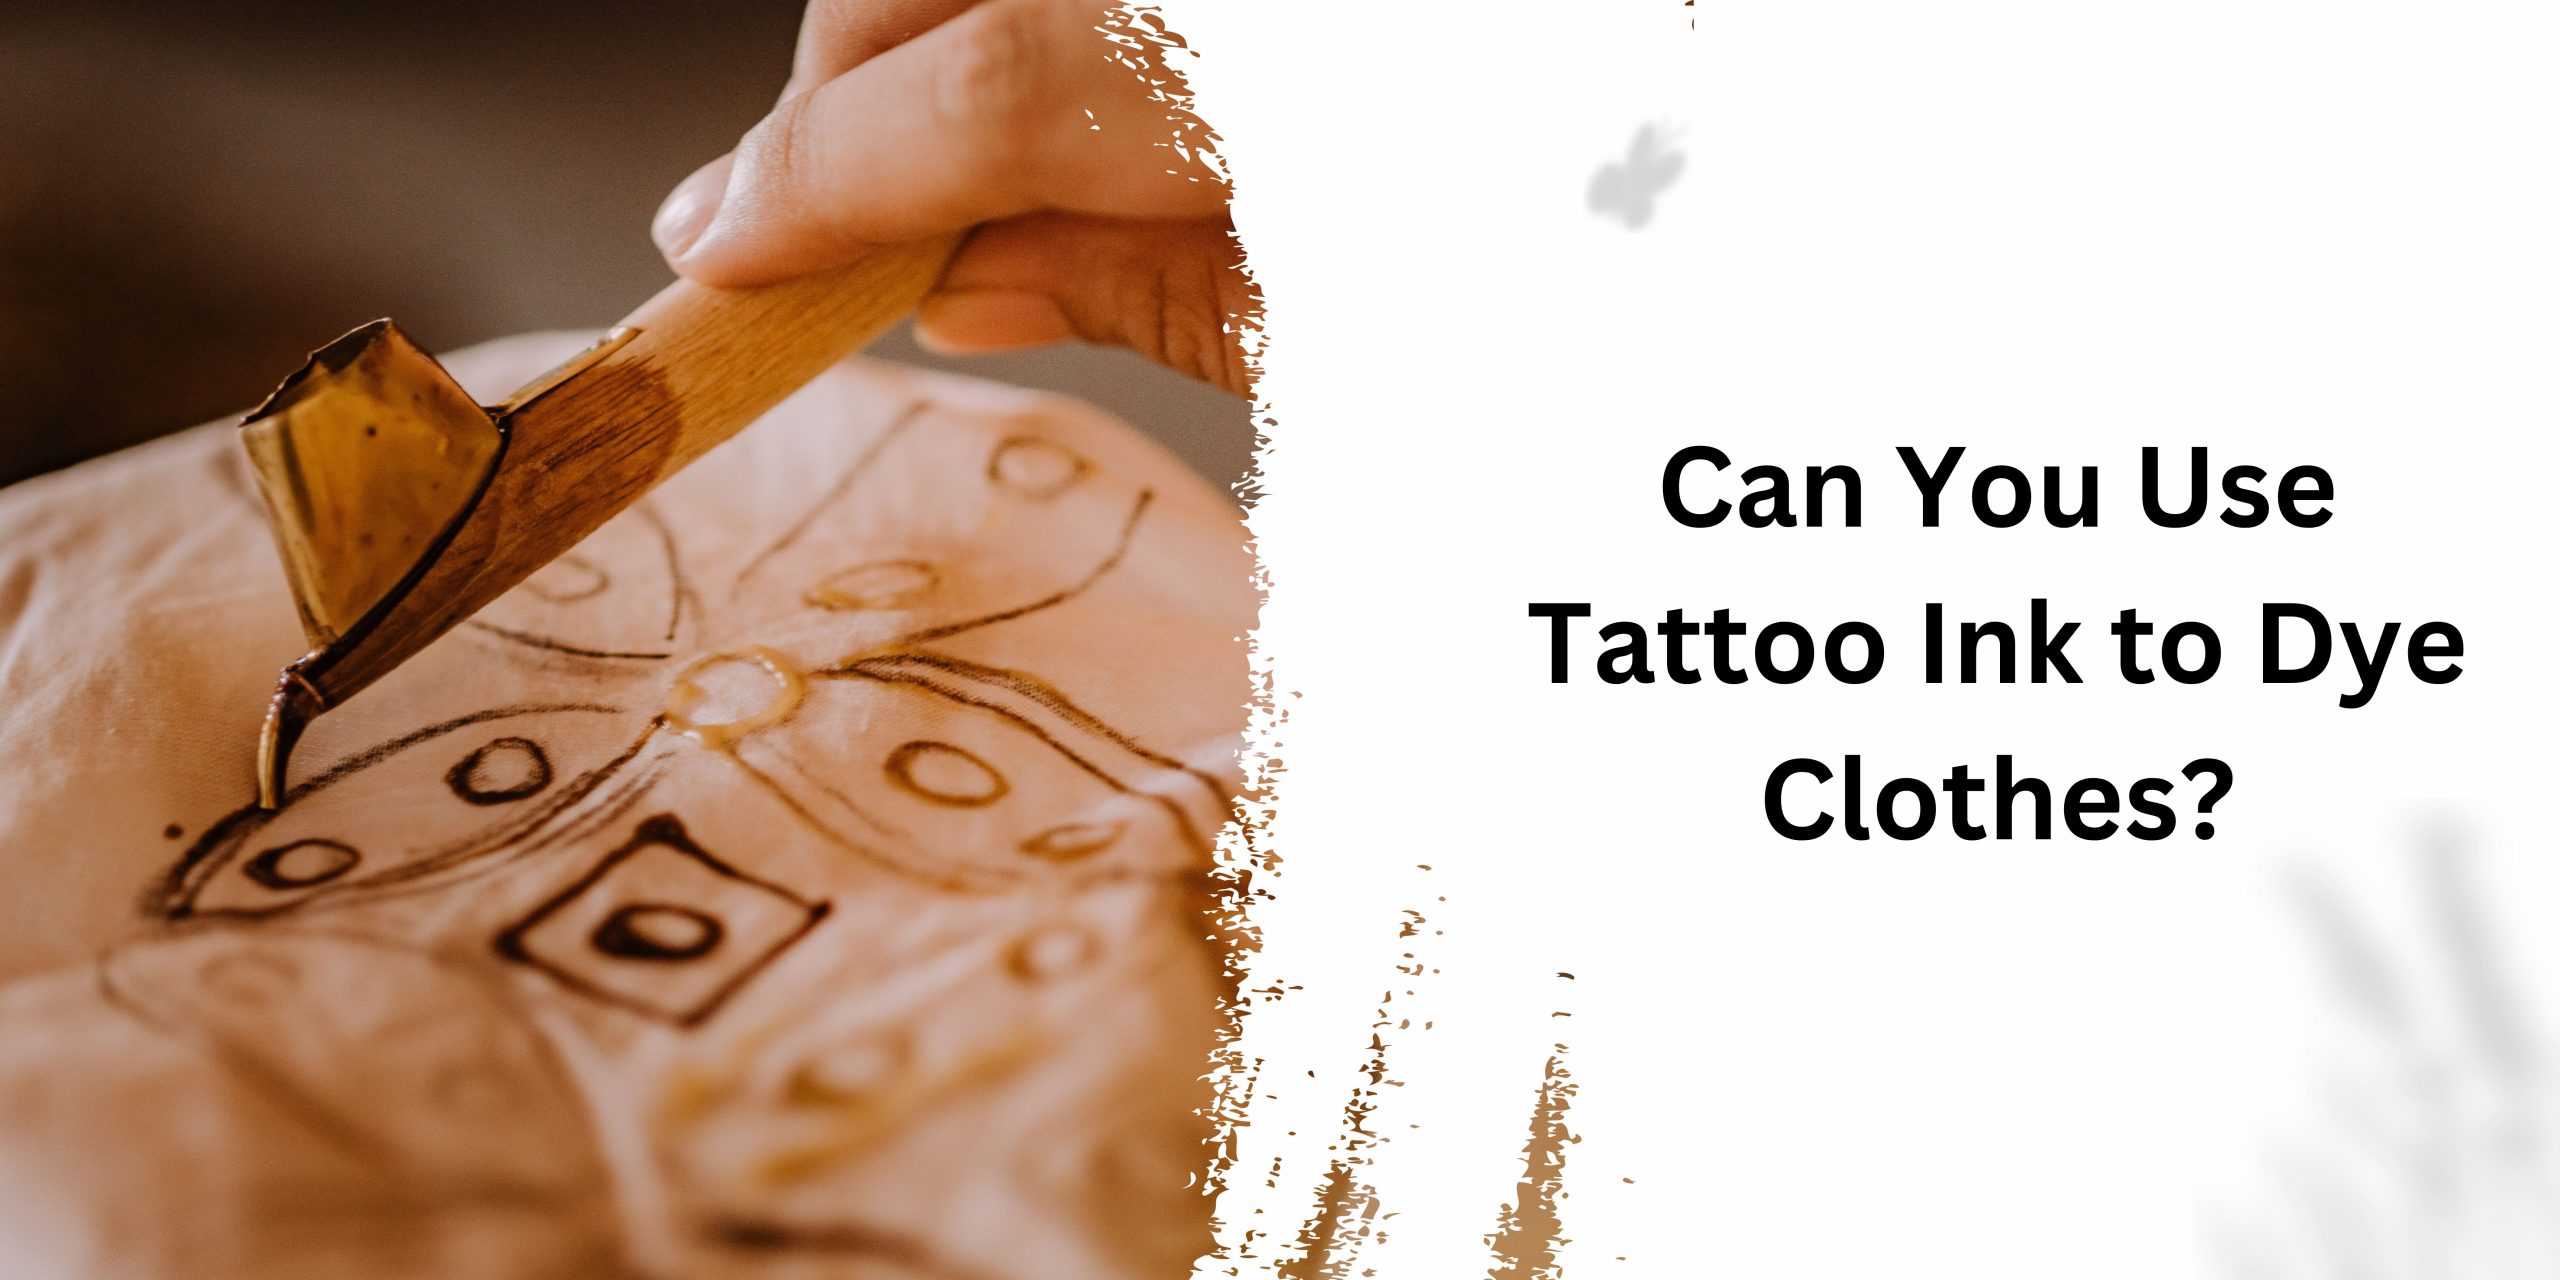 Can You Use Tattoo Ink to Dye Clothes